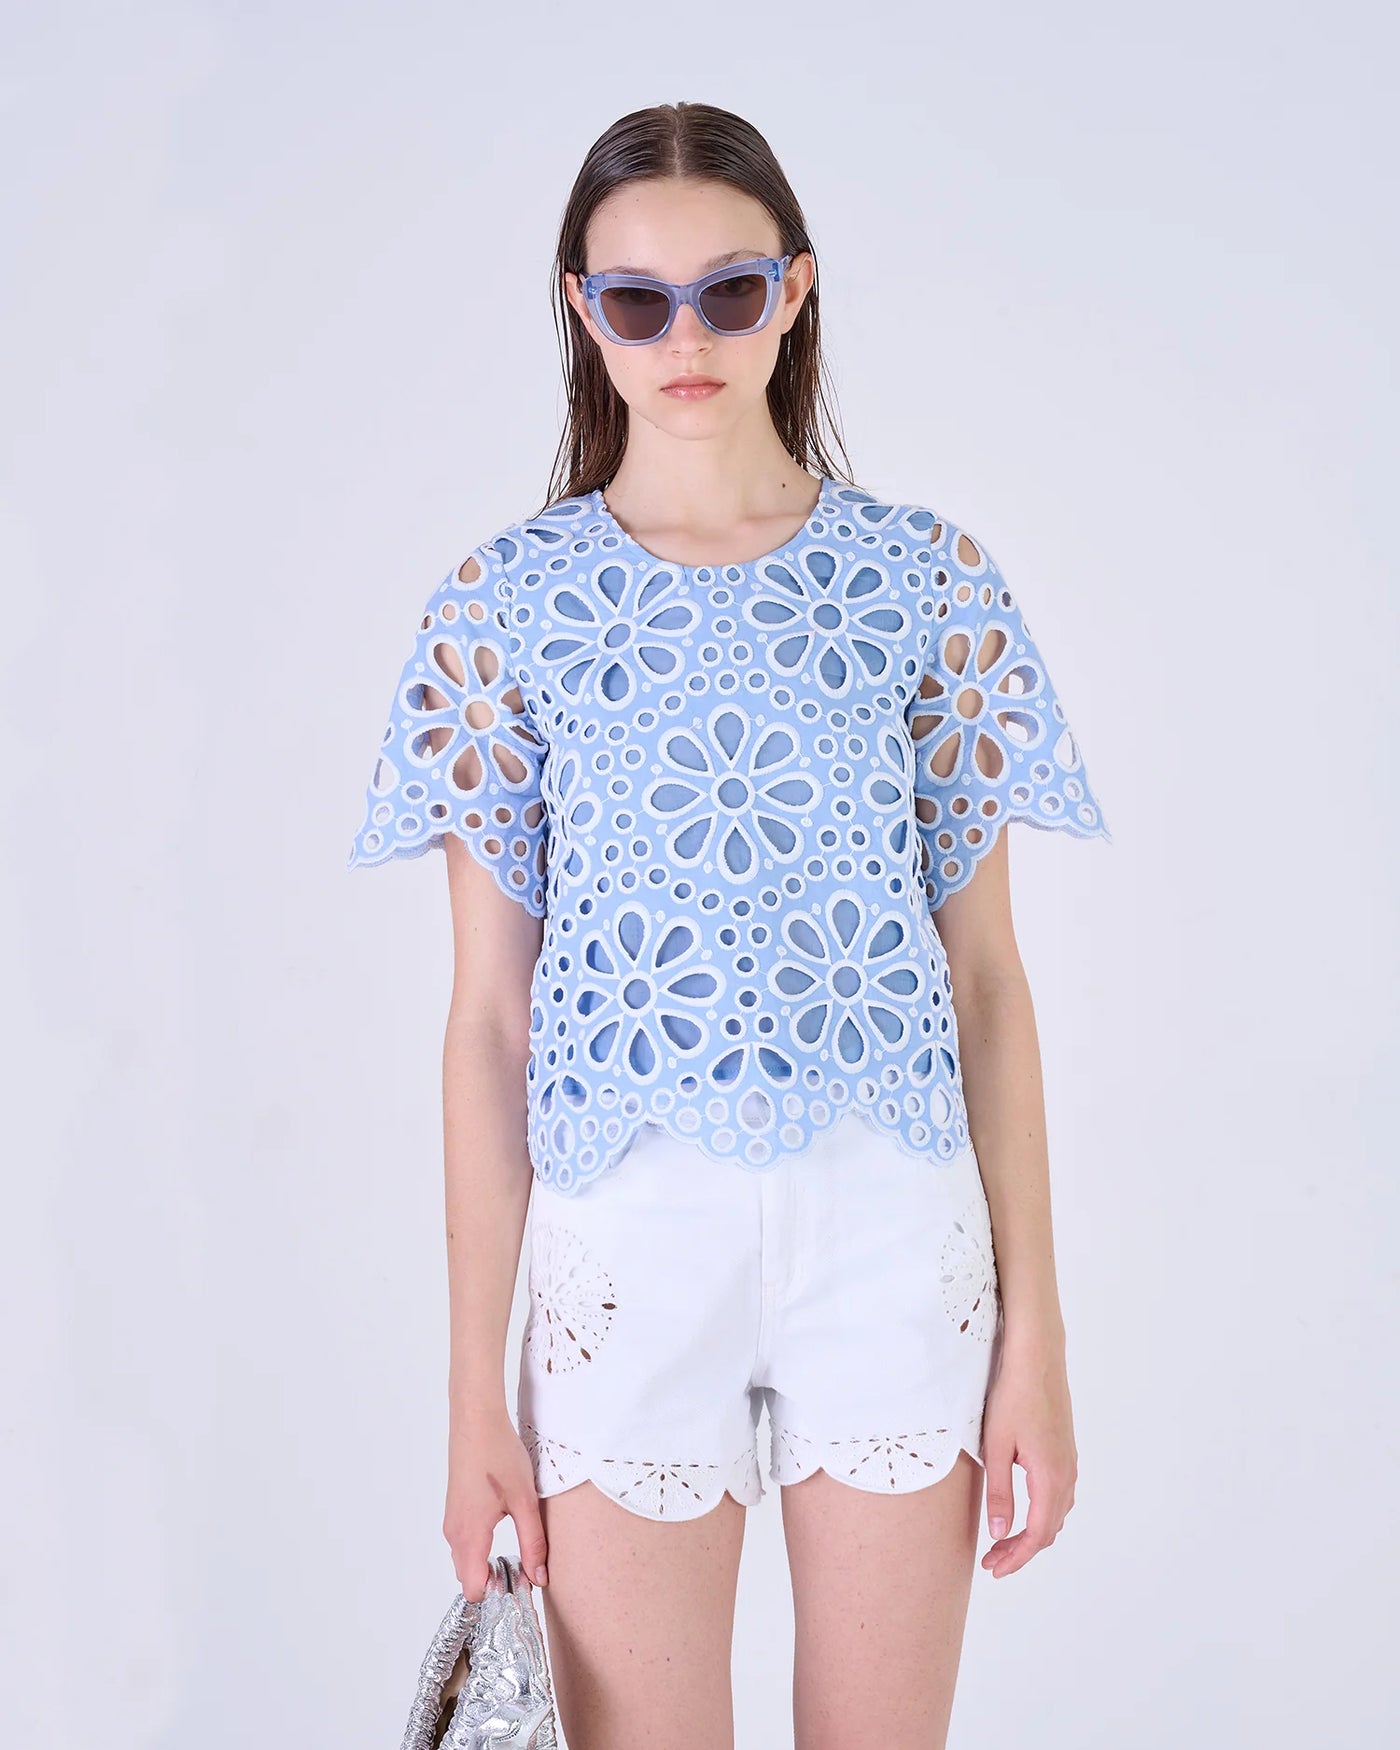 Blue & White Floral Cut Out Top With Round Neck